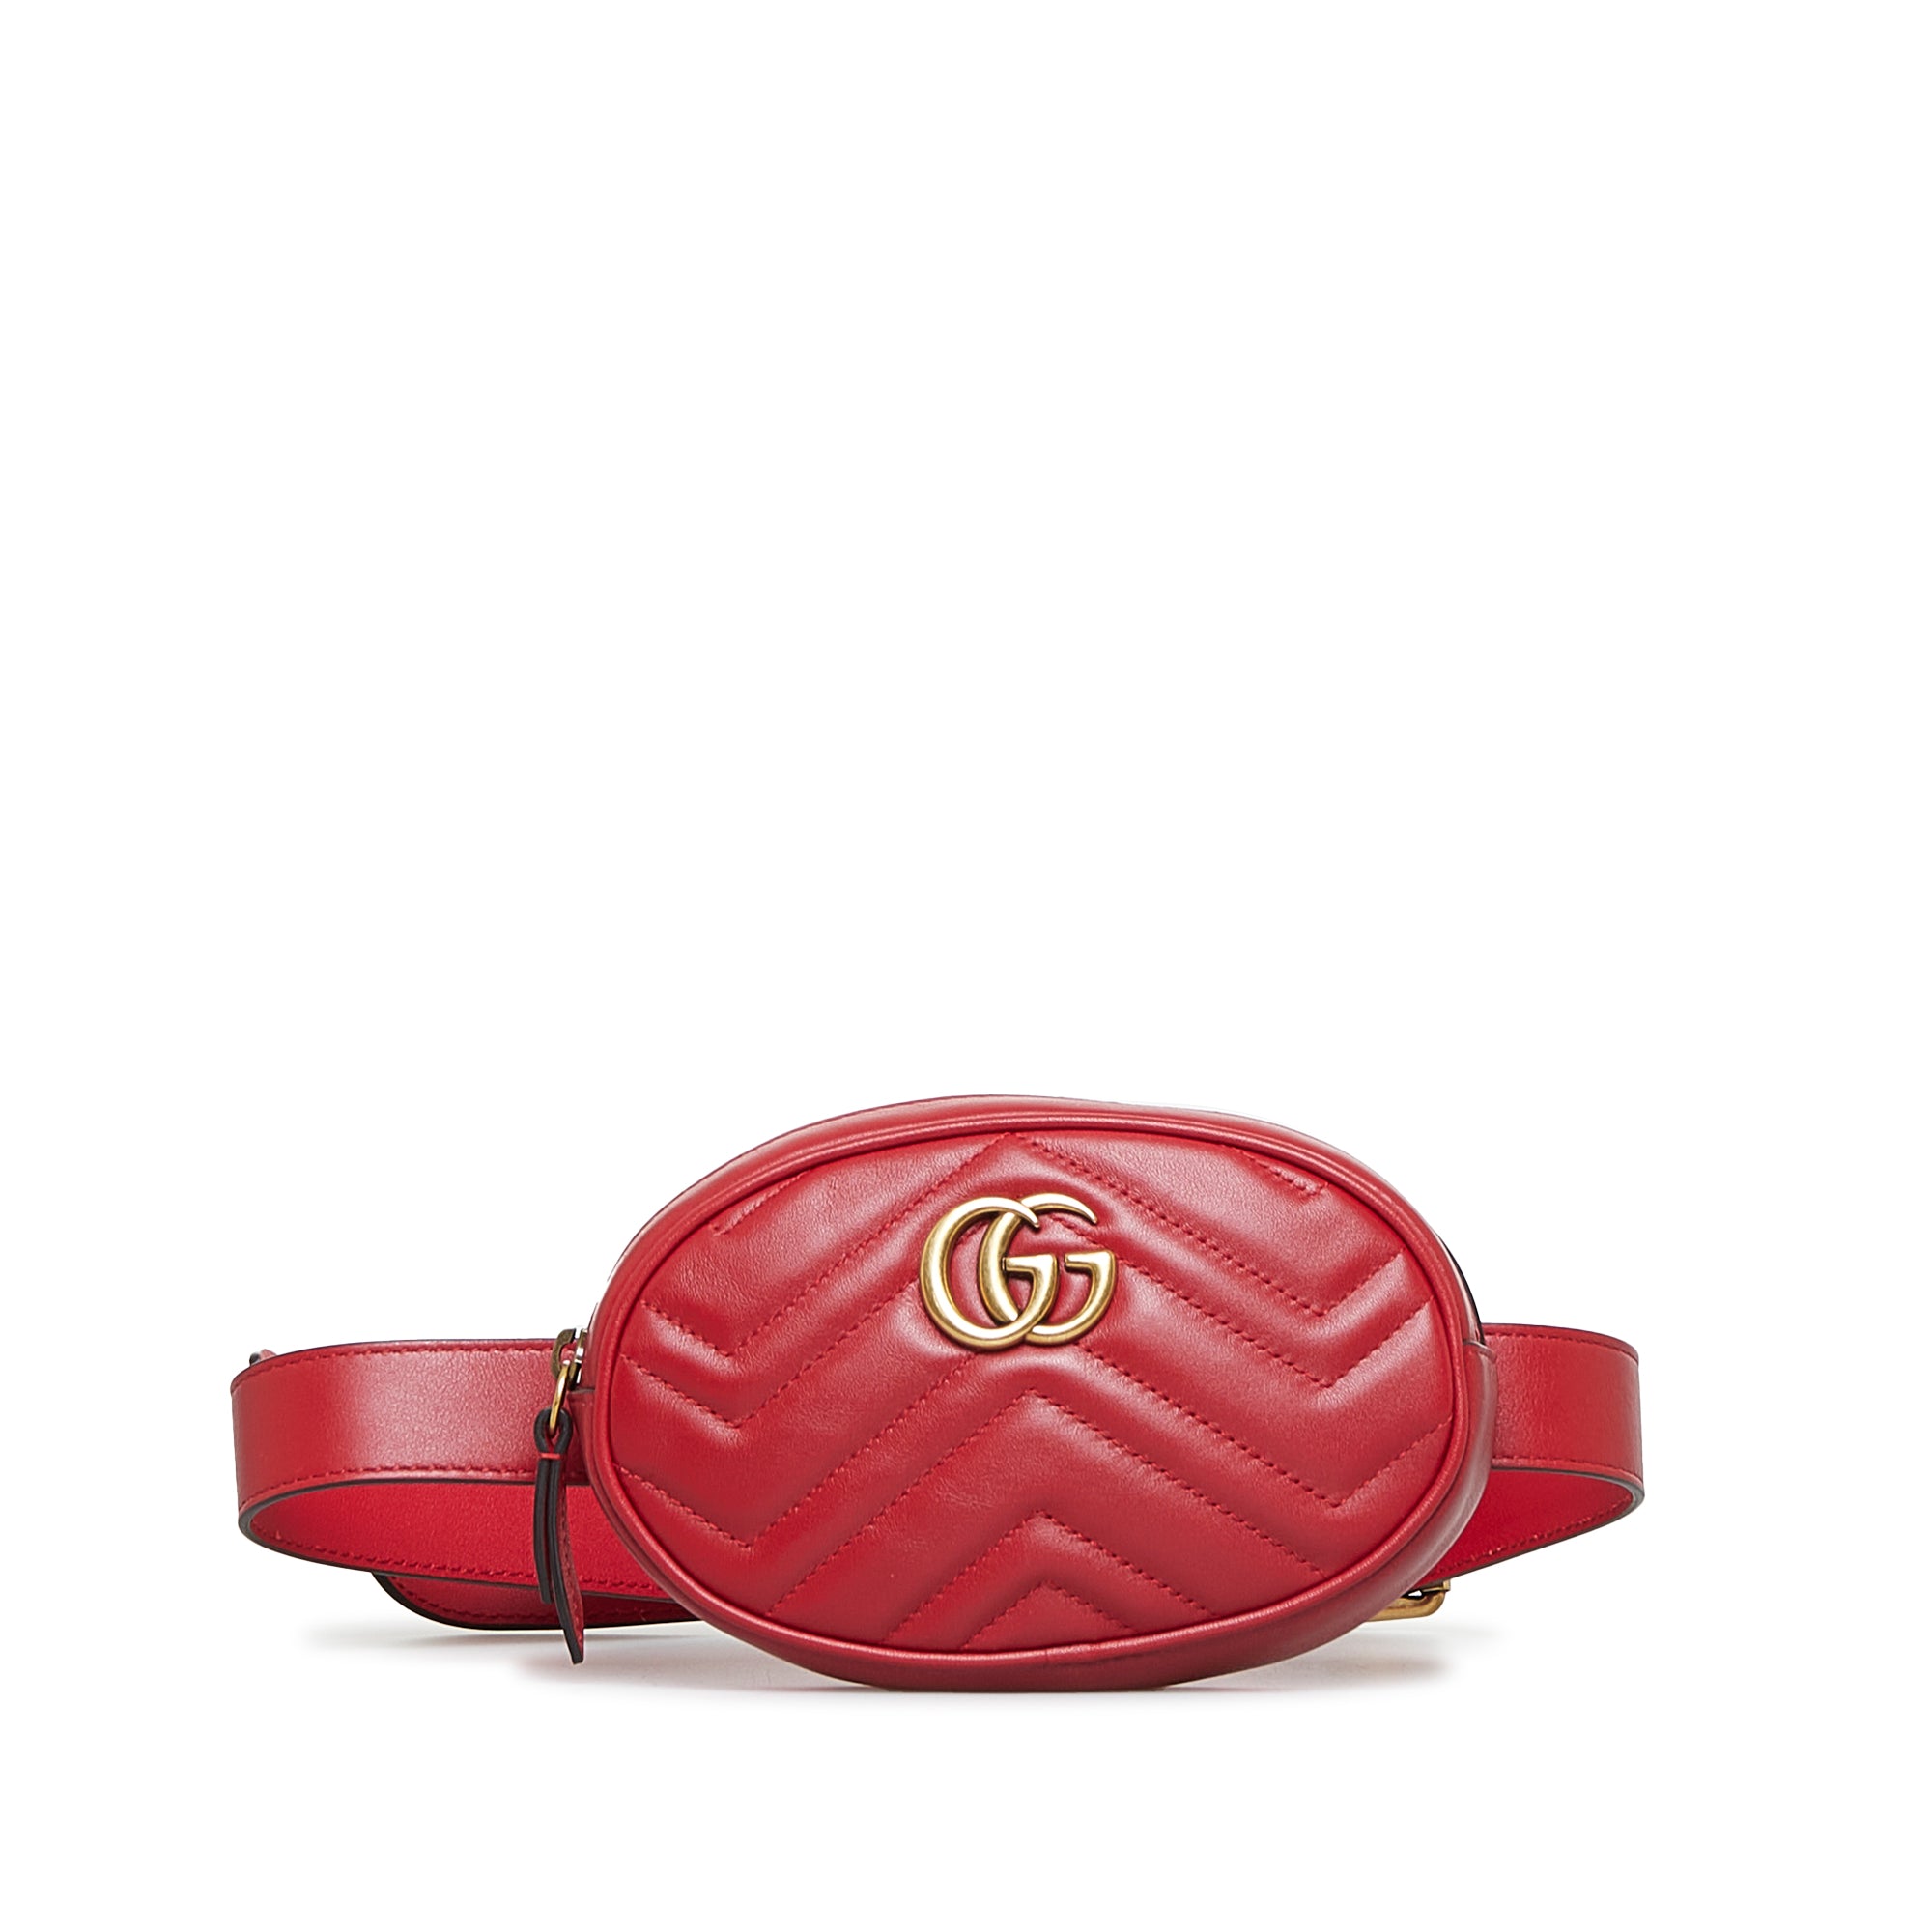 Chanel Red Quilted Leather Studded Logo Waist Bag Chanel | The Luxury Closet